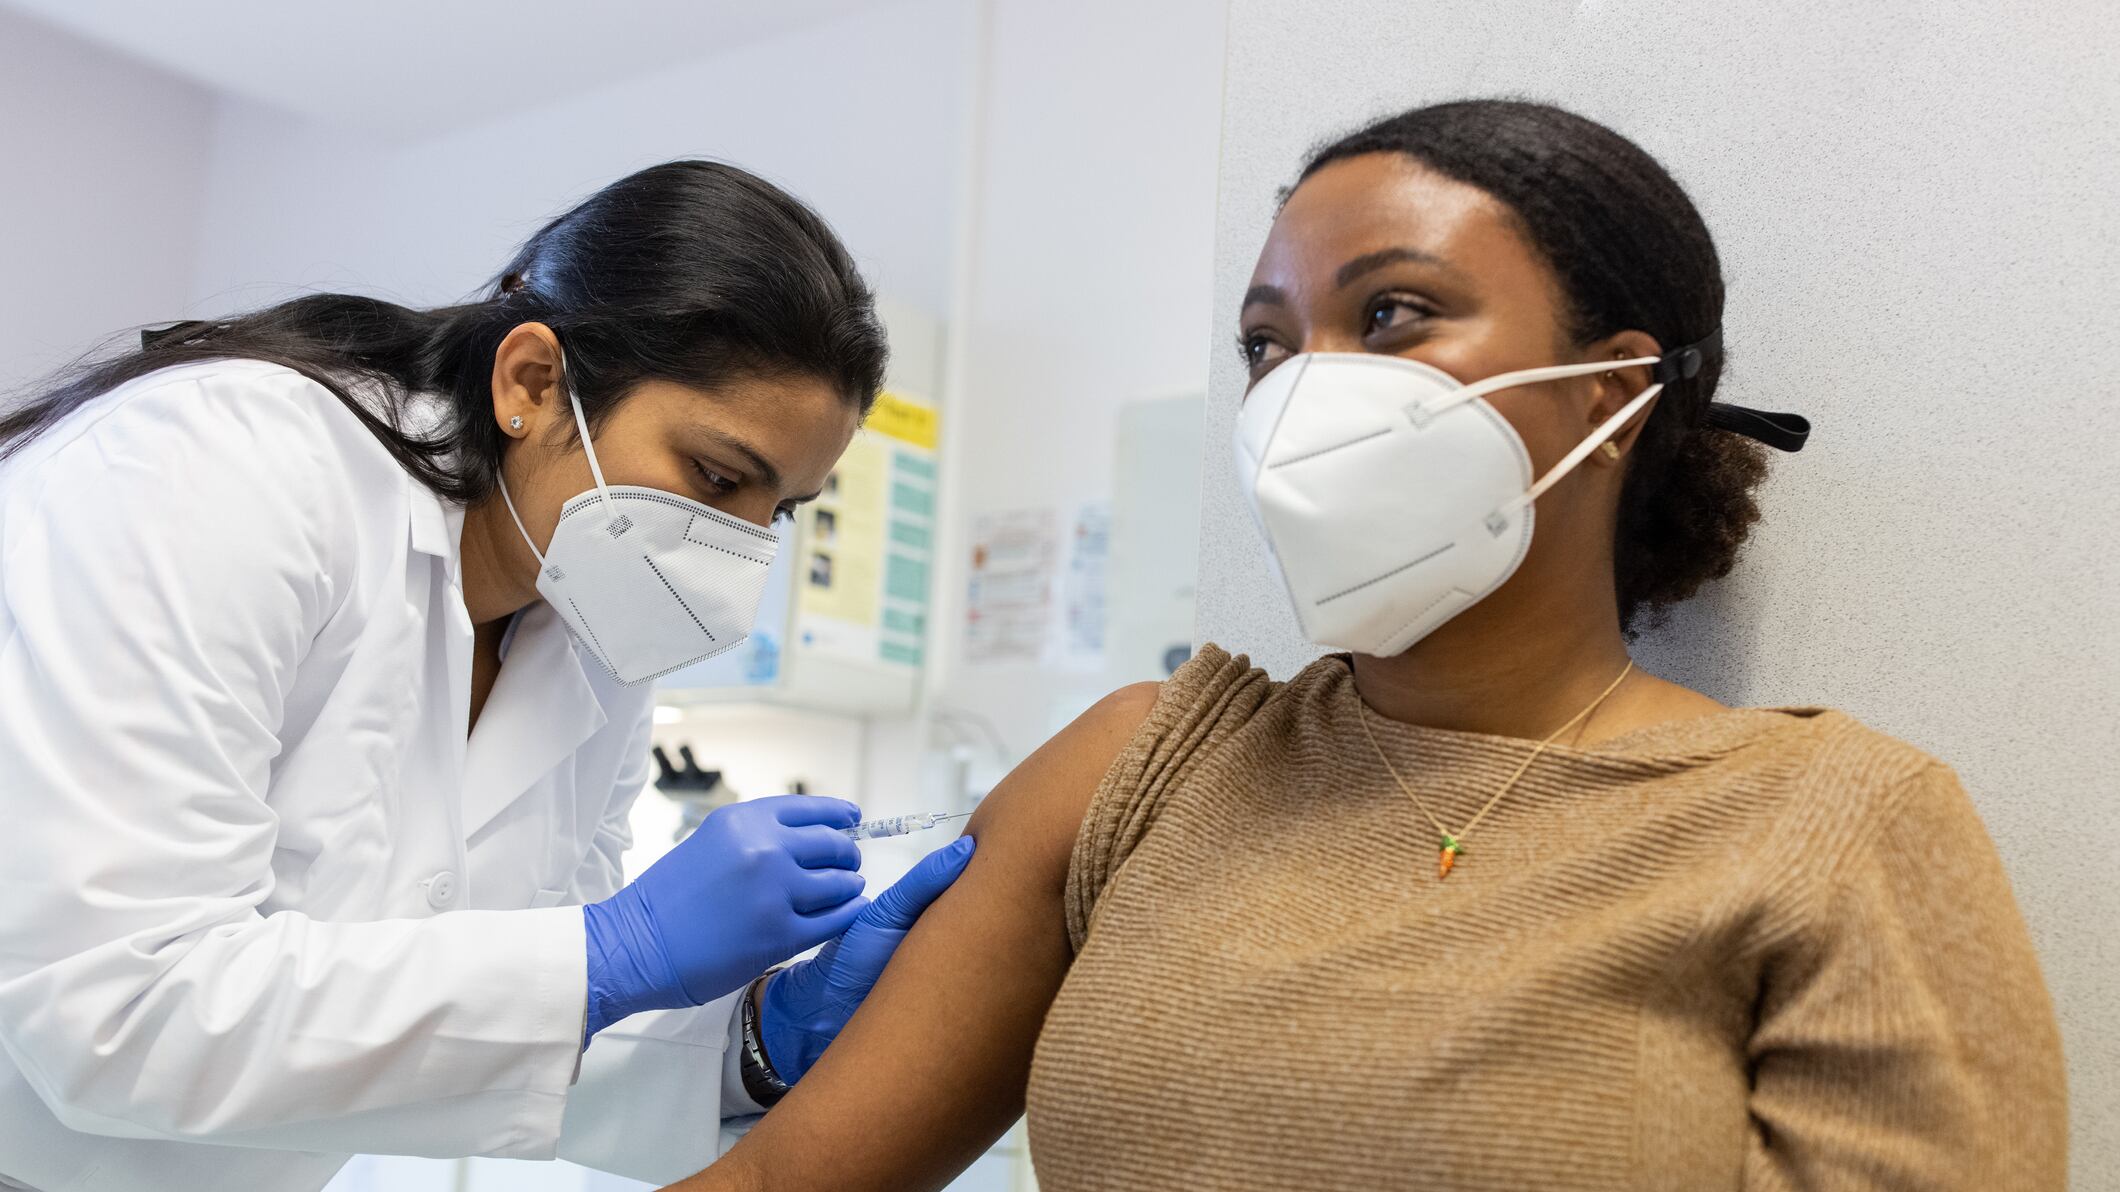 A masked woman receives a shot from a doctor.